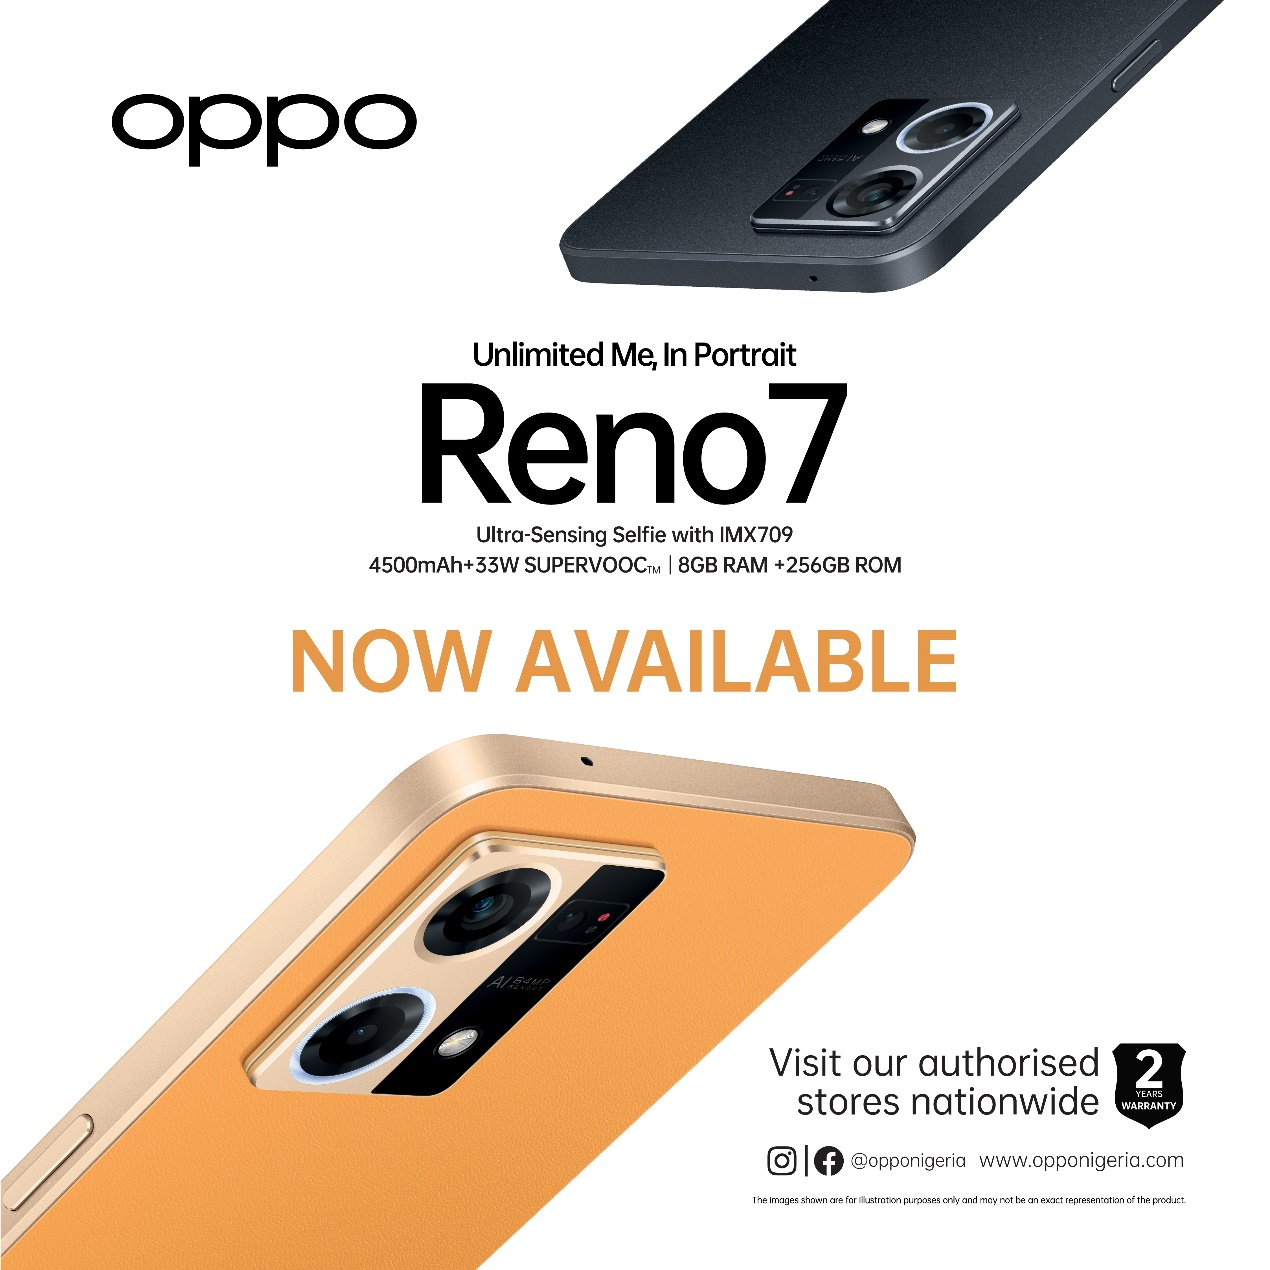 OPPO Reno 7 available